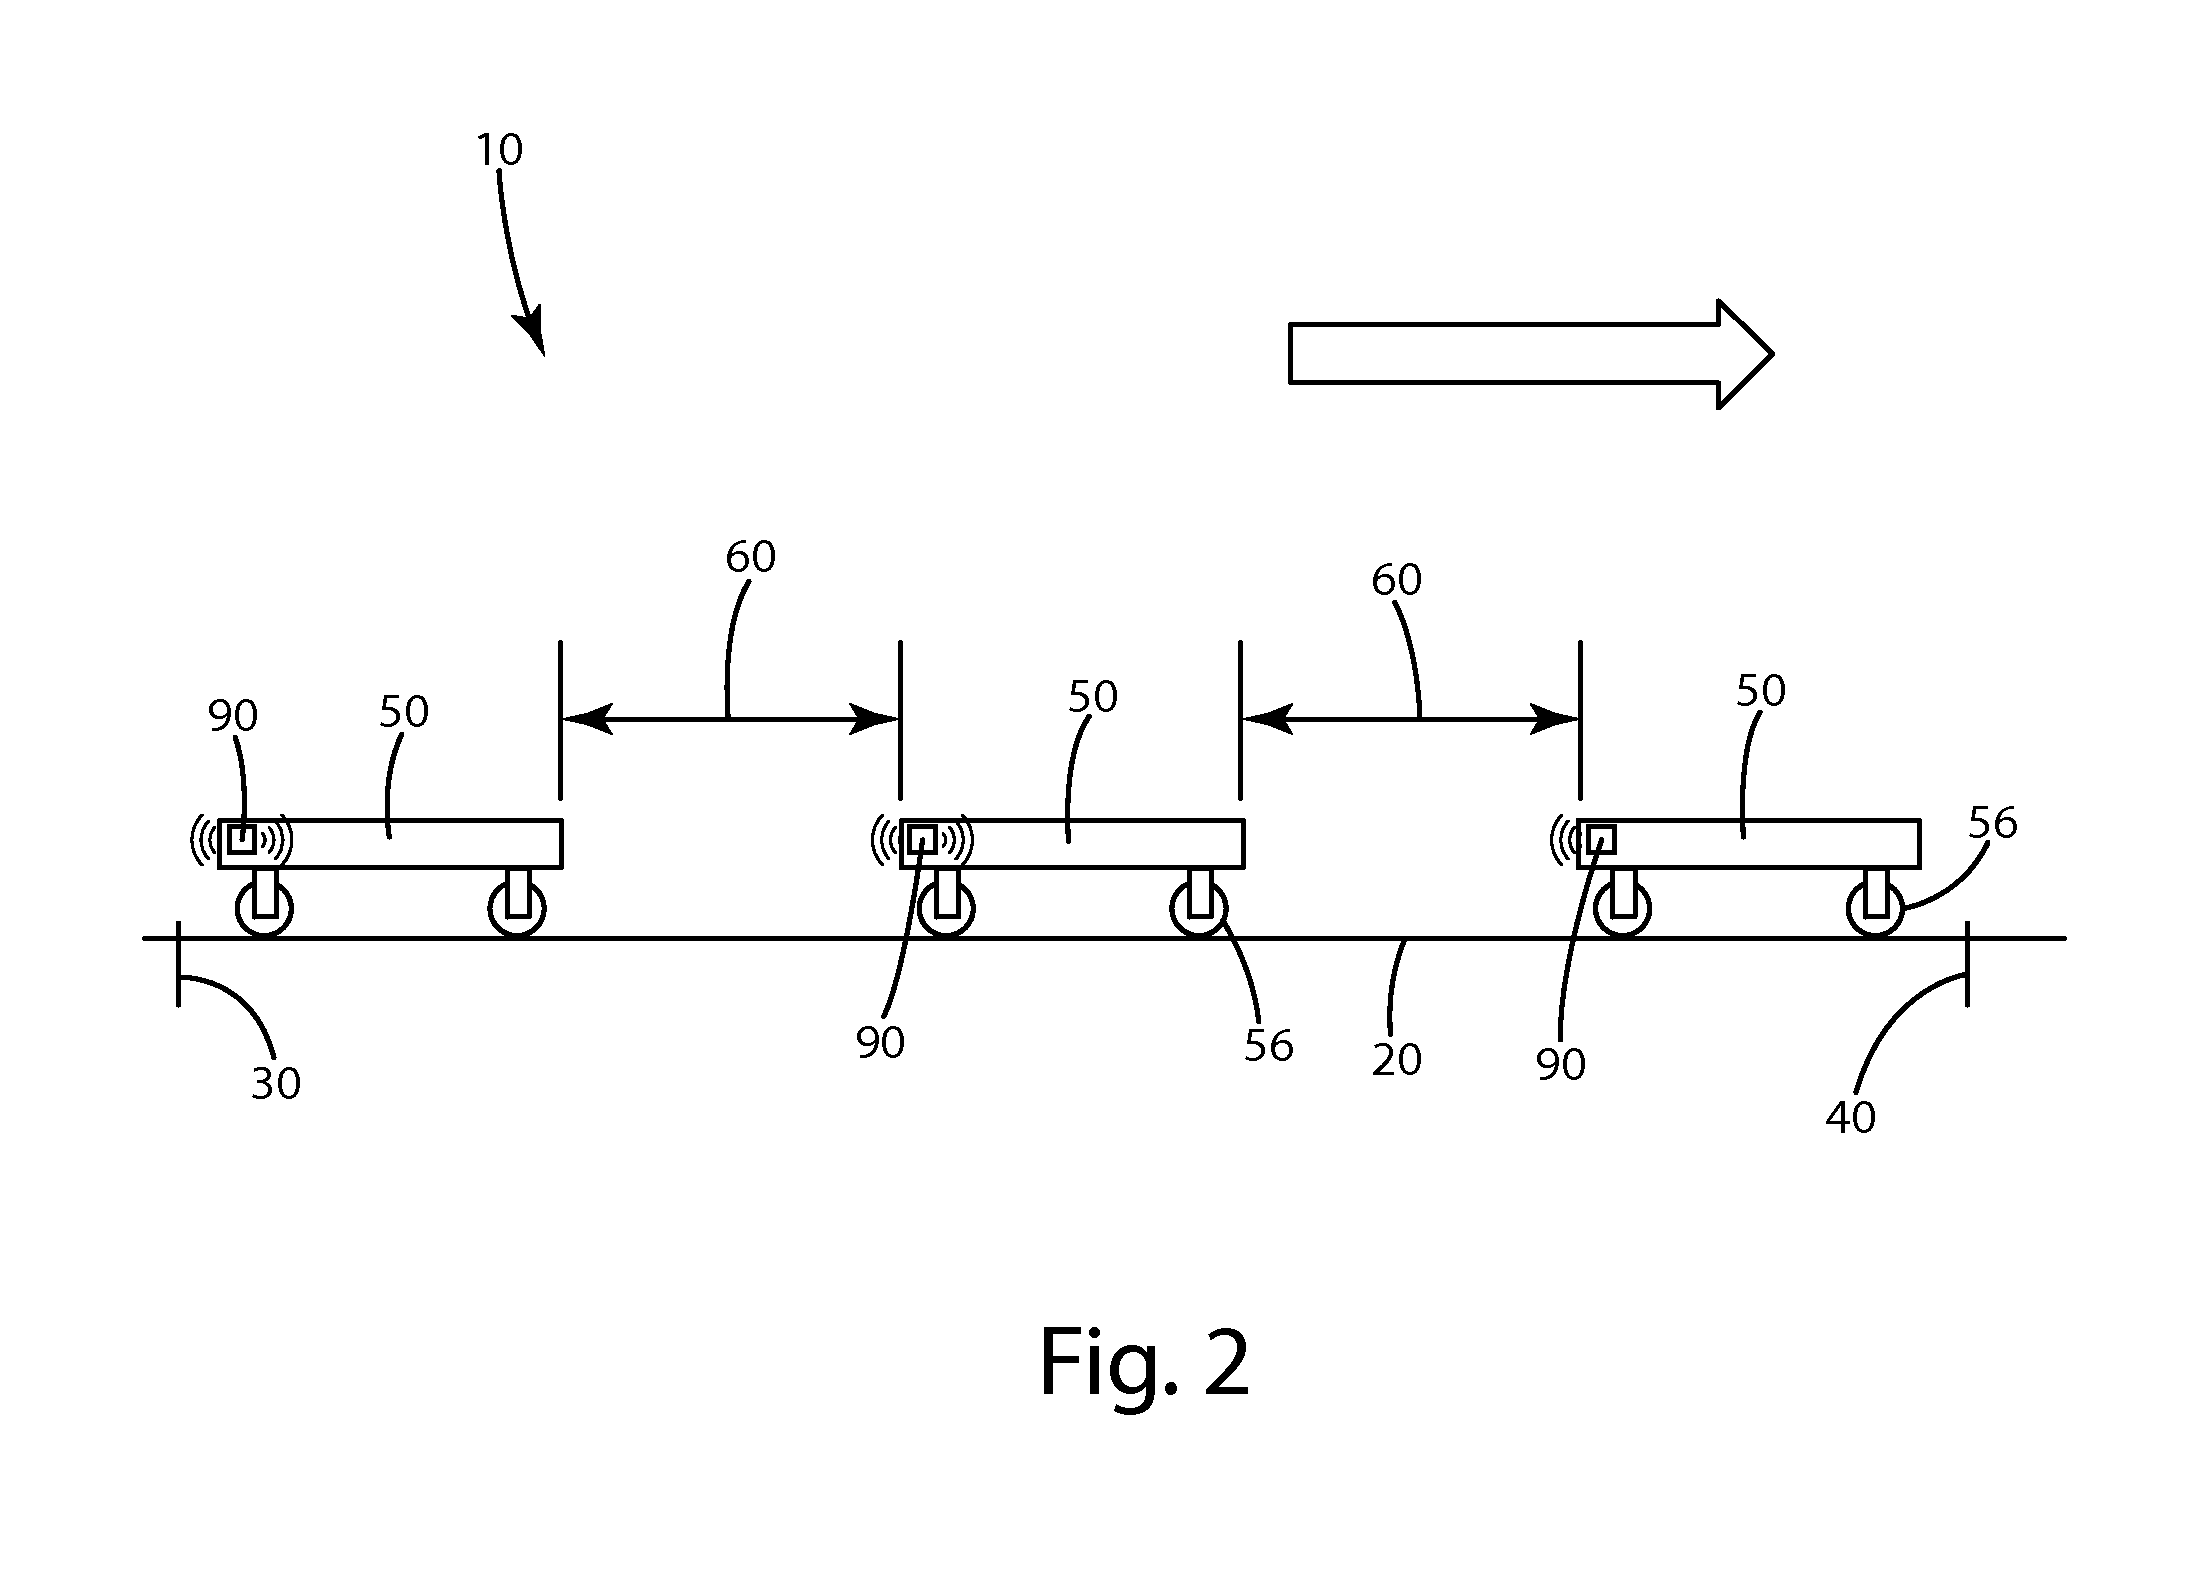 Method of material handling with automatic guided vehicles